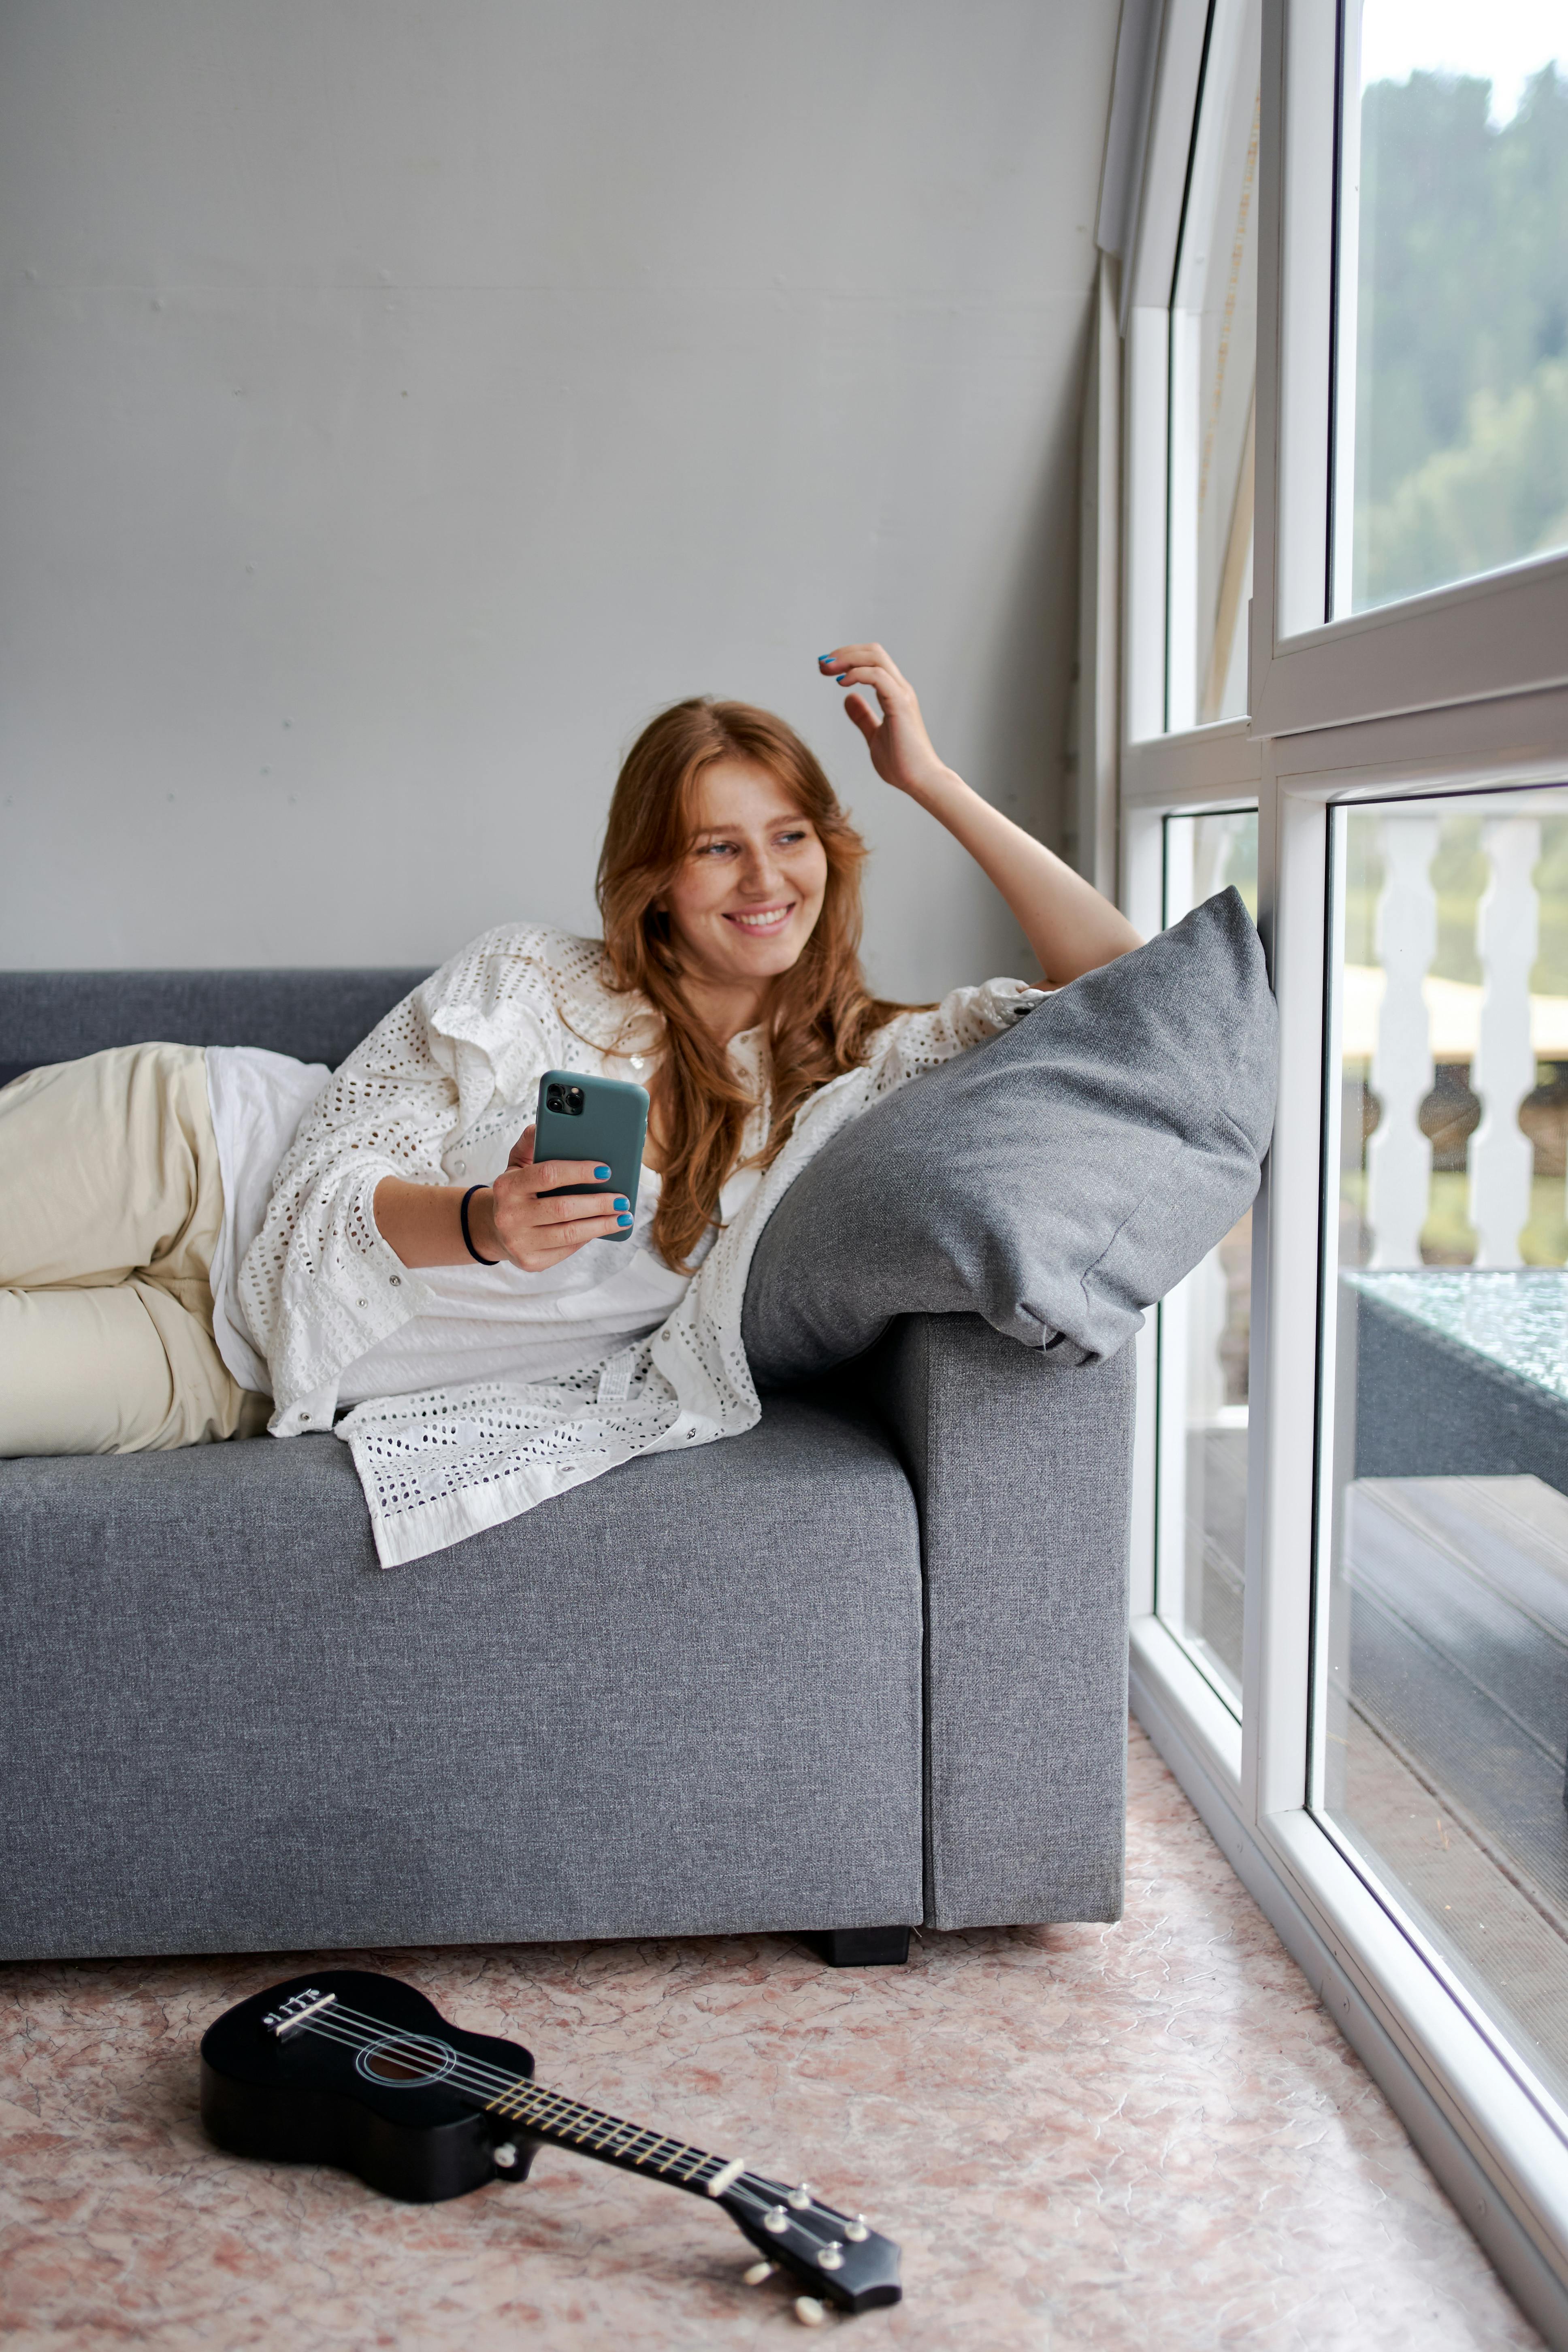 smiling woman with smartphone lounging on sofa in house